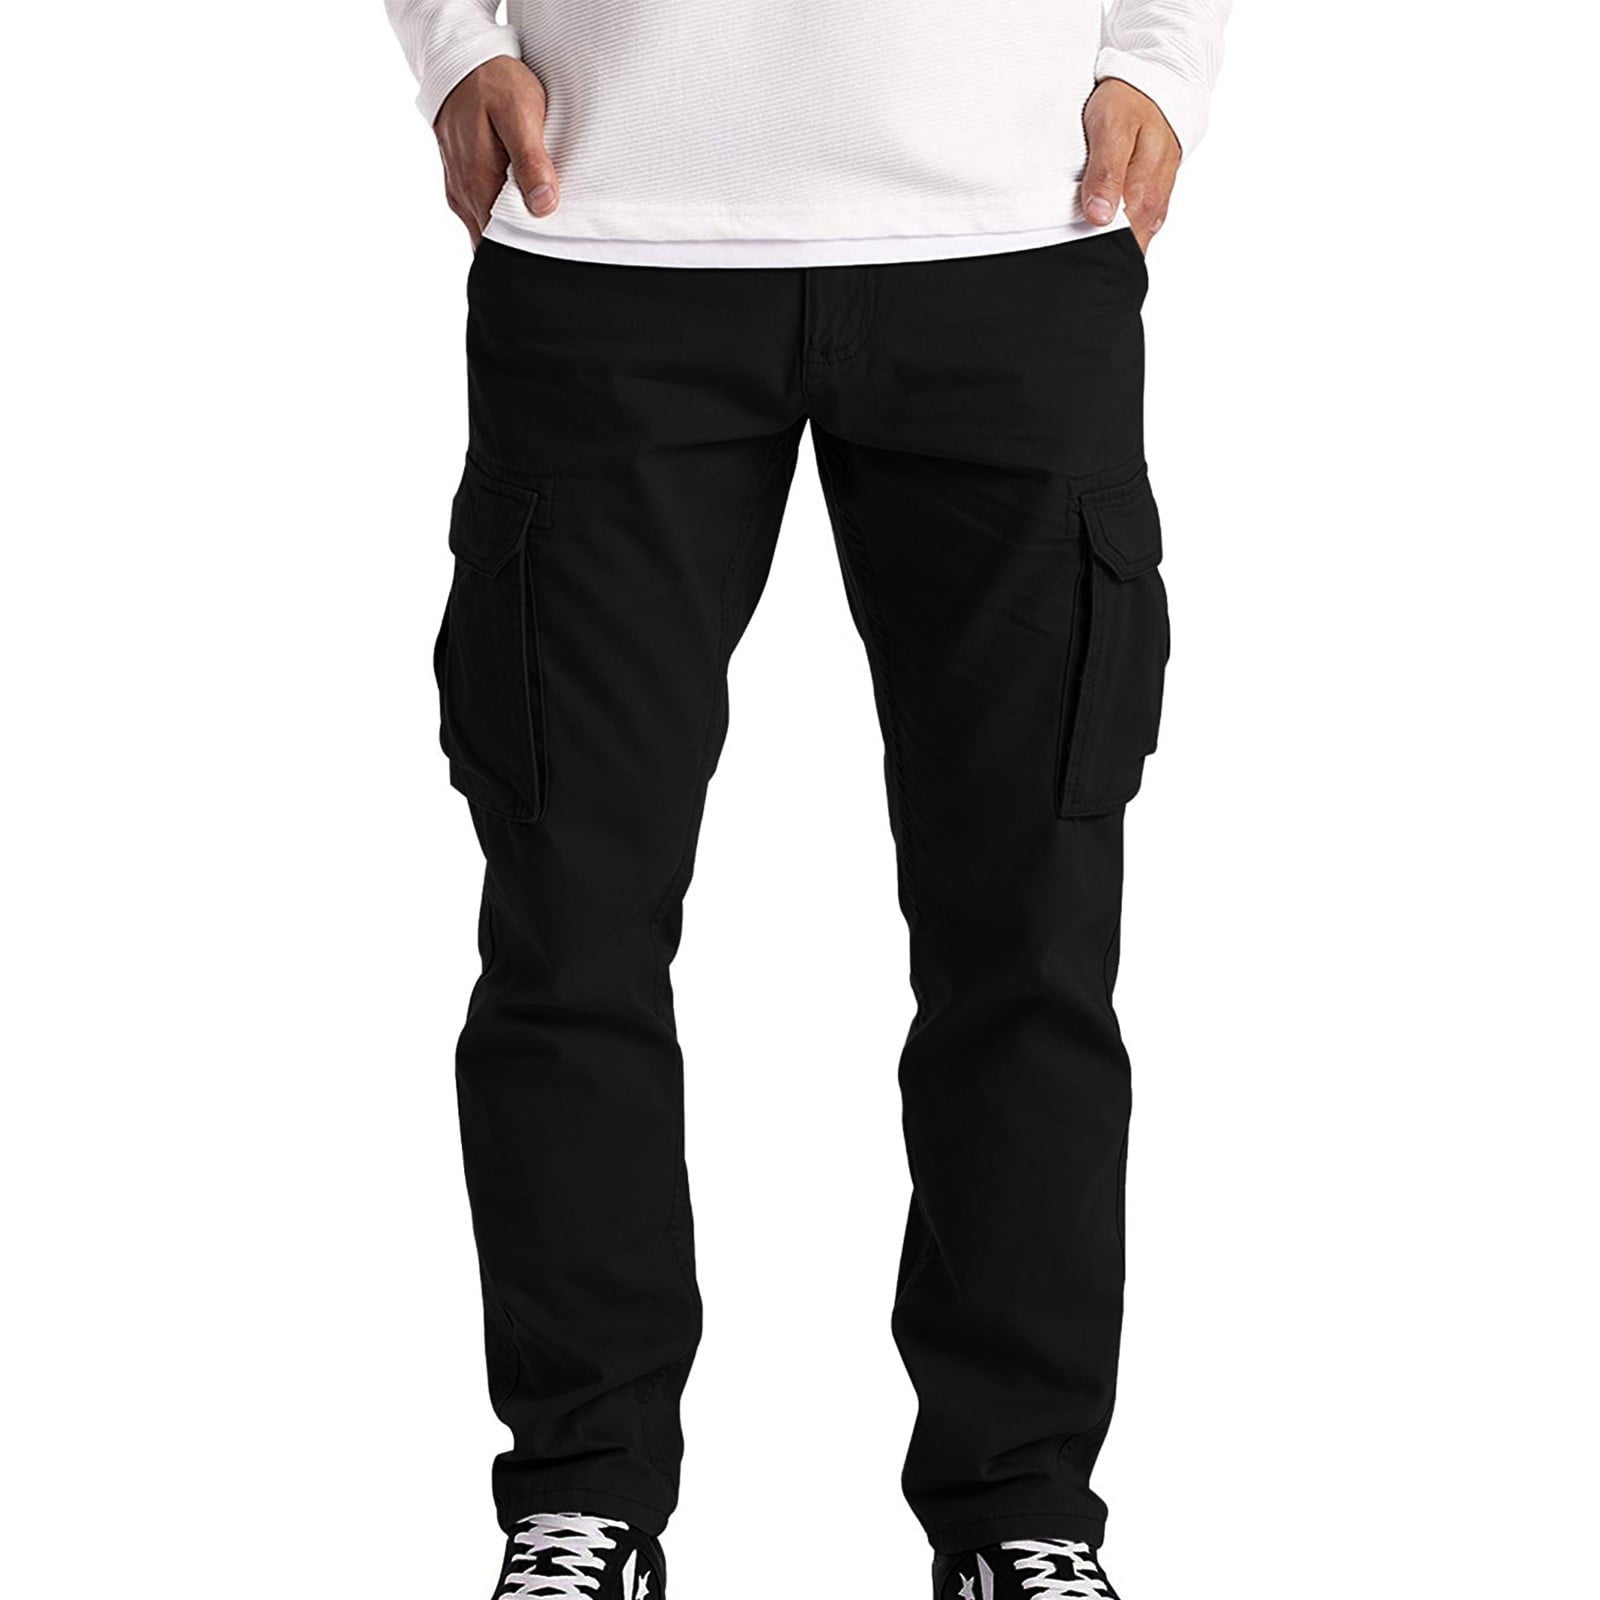 Clearance Cargo Pants for Men Relaxed Fit with Pockets Baggy Big and ...